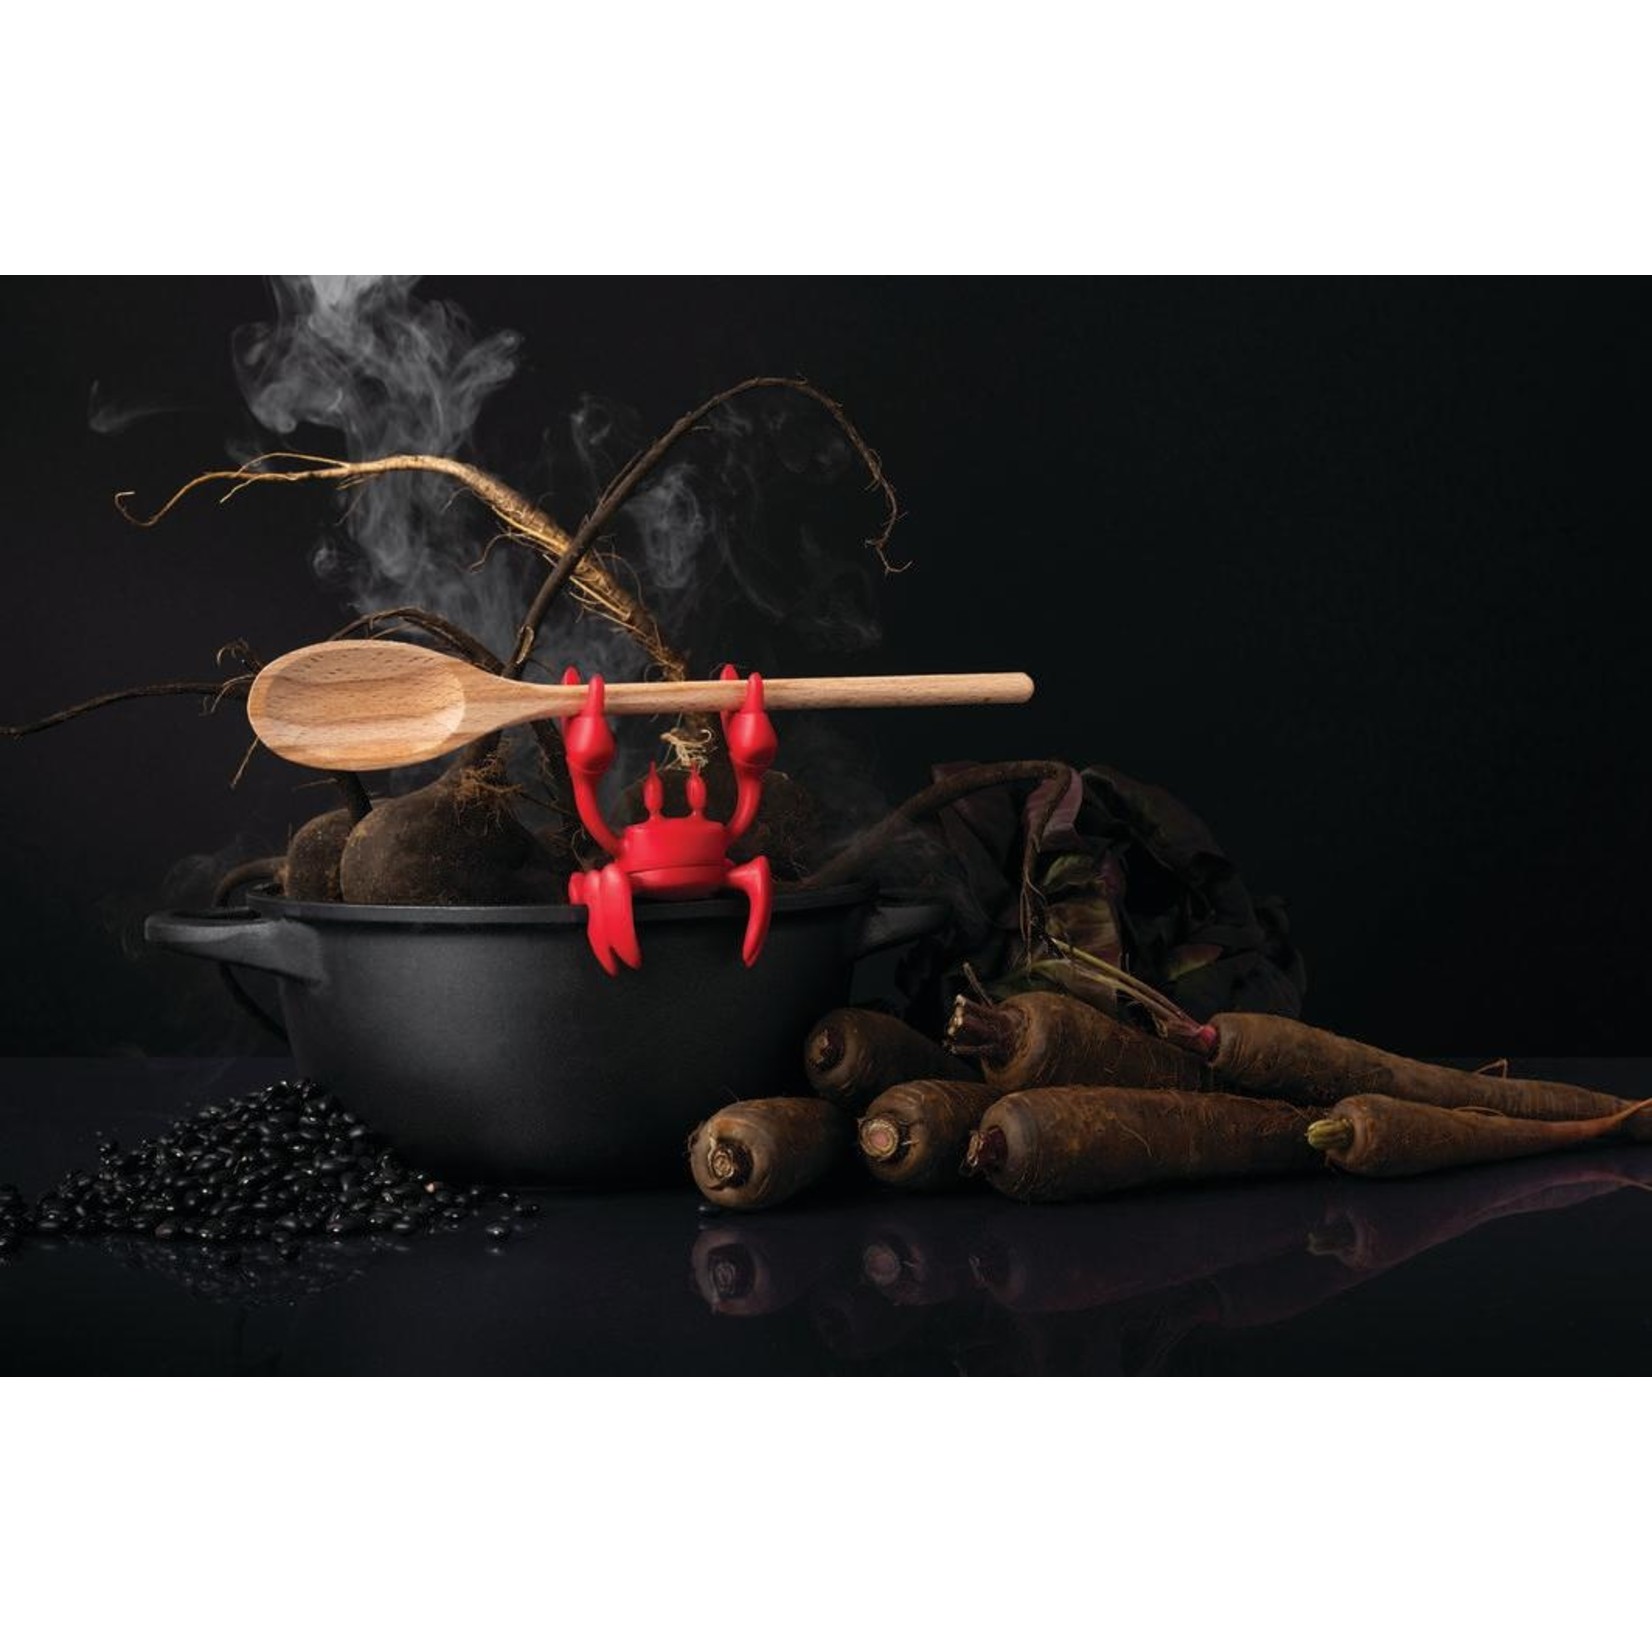 Red Crab - Spoon Holder and Steam Releaser